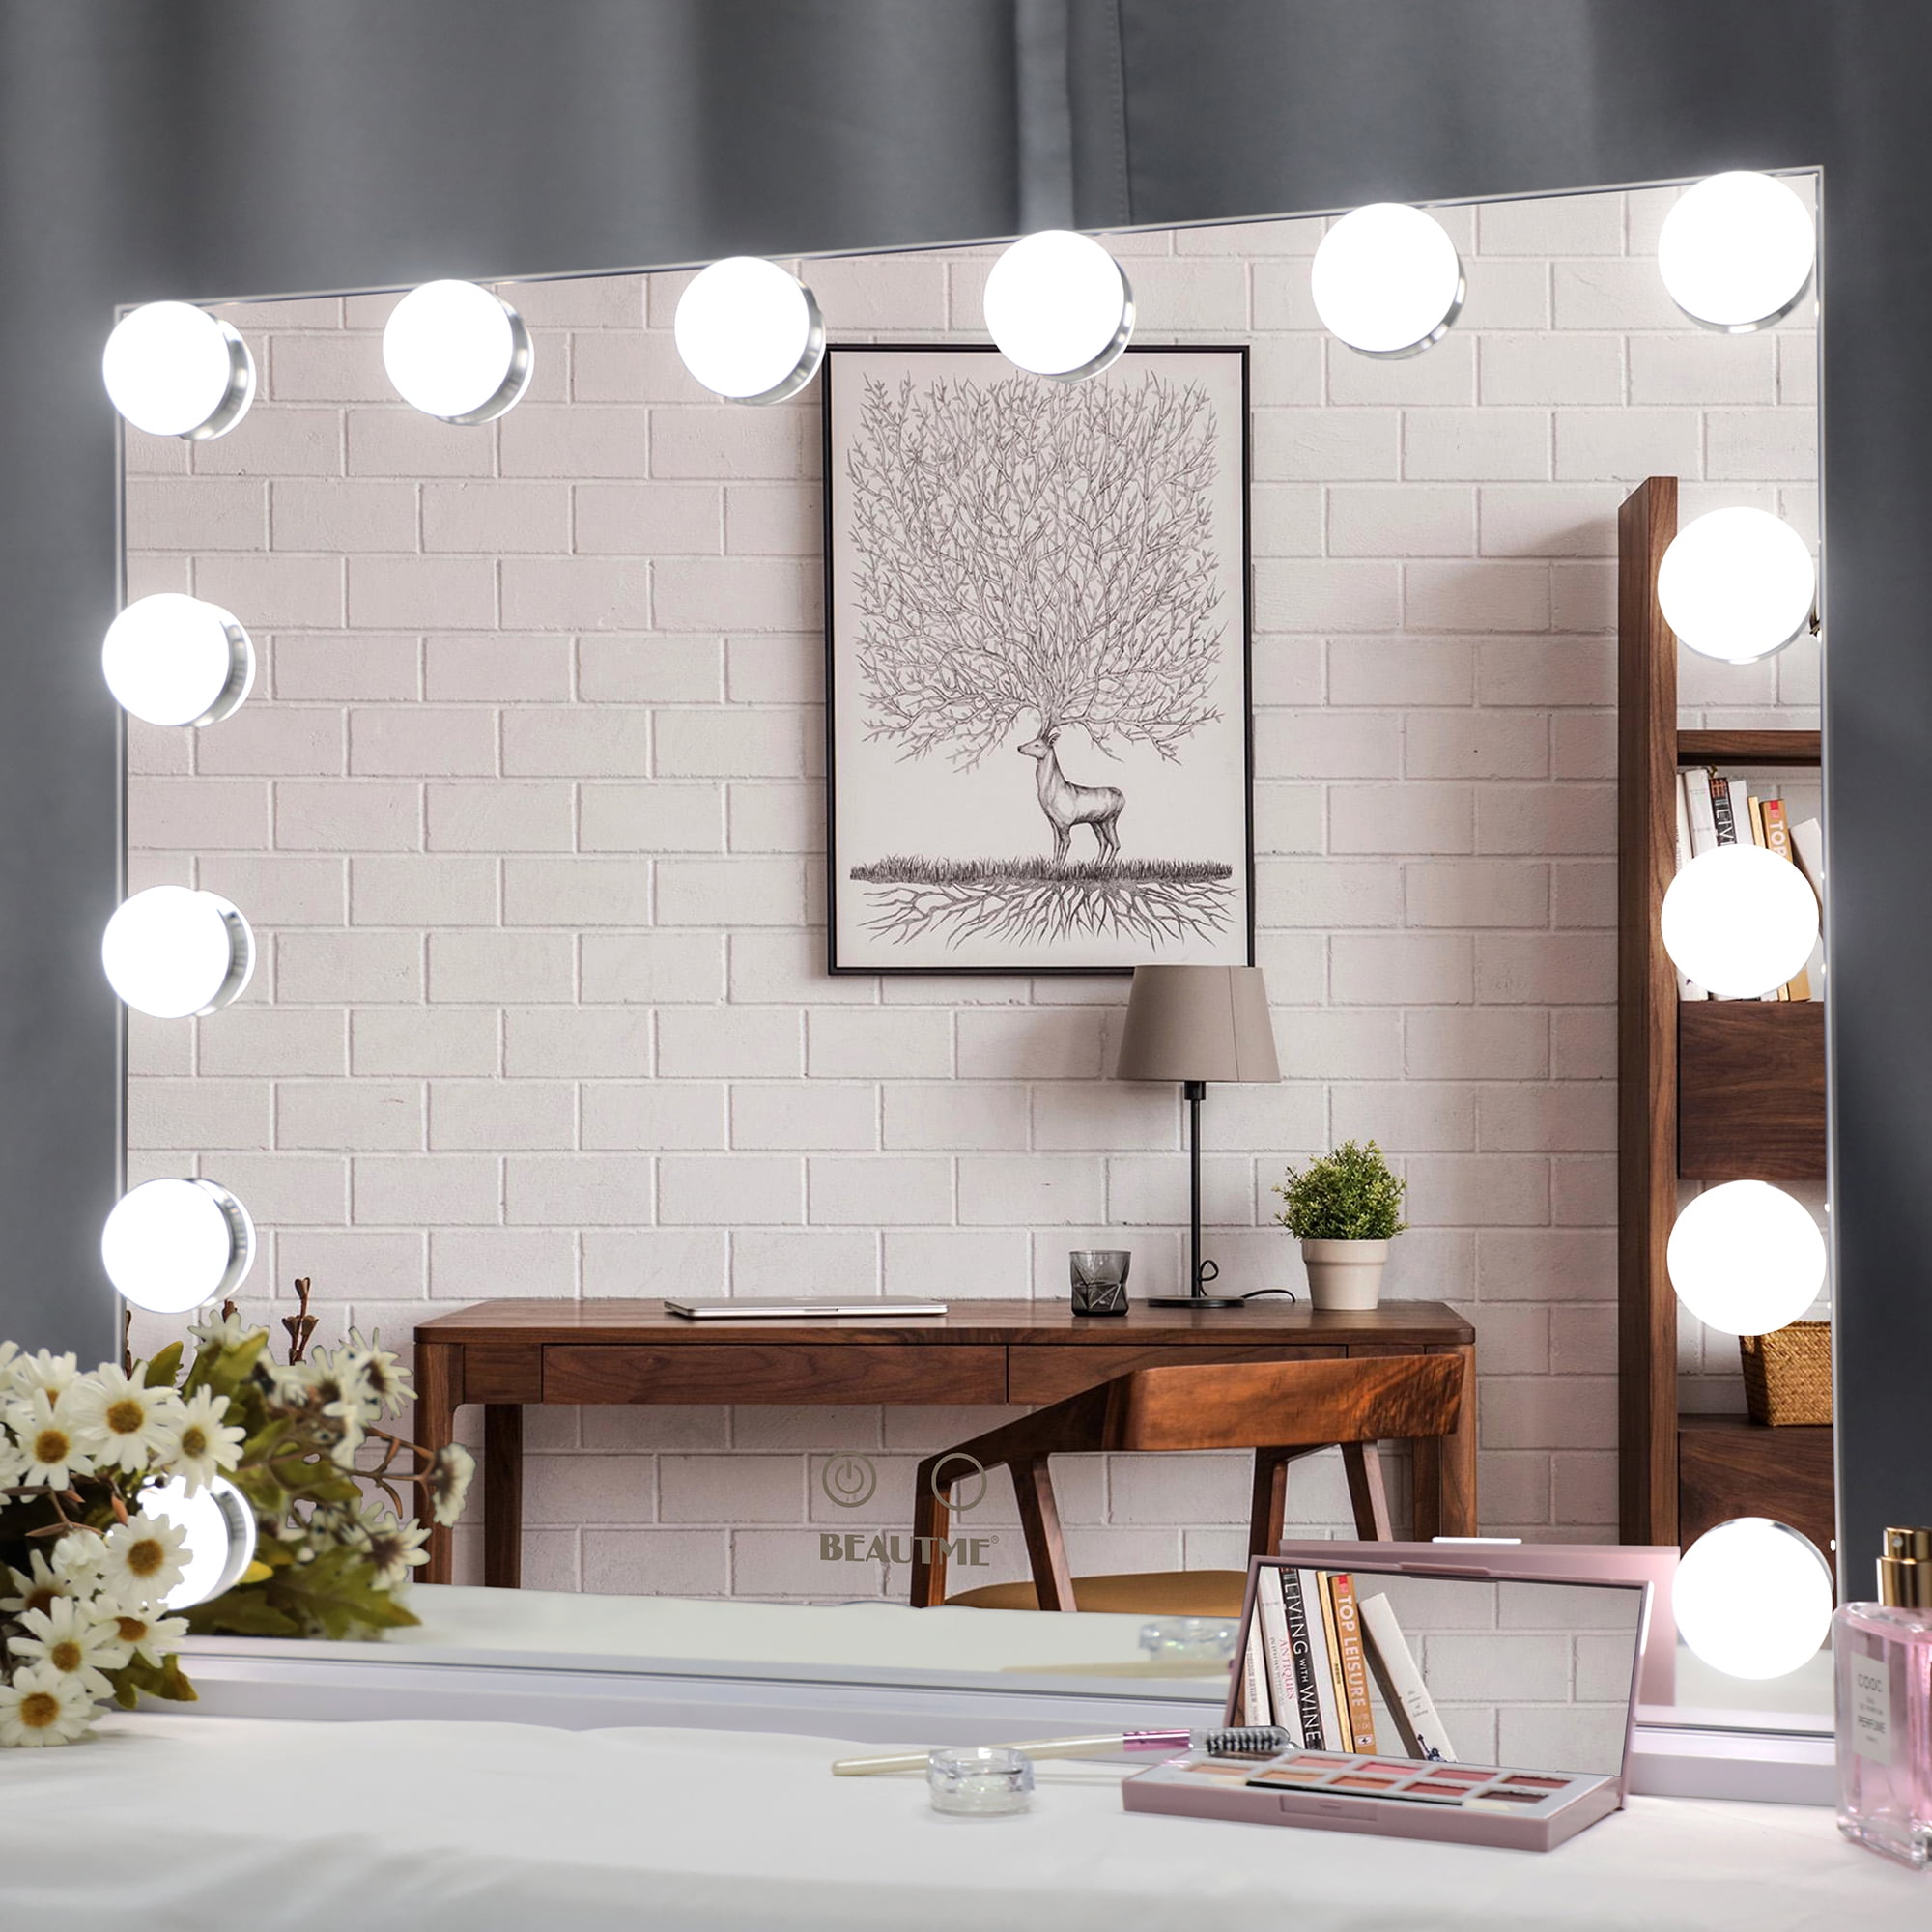  FENNIO Vanity Mirror with Lights 22x19 LED Lighted Makeup  Mirror,Large Makeup Mirror with Lights,Touch Screen with 3-Color Lighting, Led Mirror Makeup,Dimmable,for Vanity Desk Tabletop,Bedroom